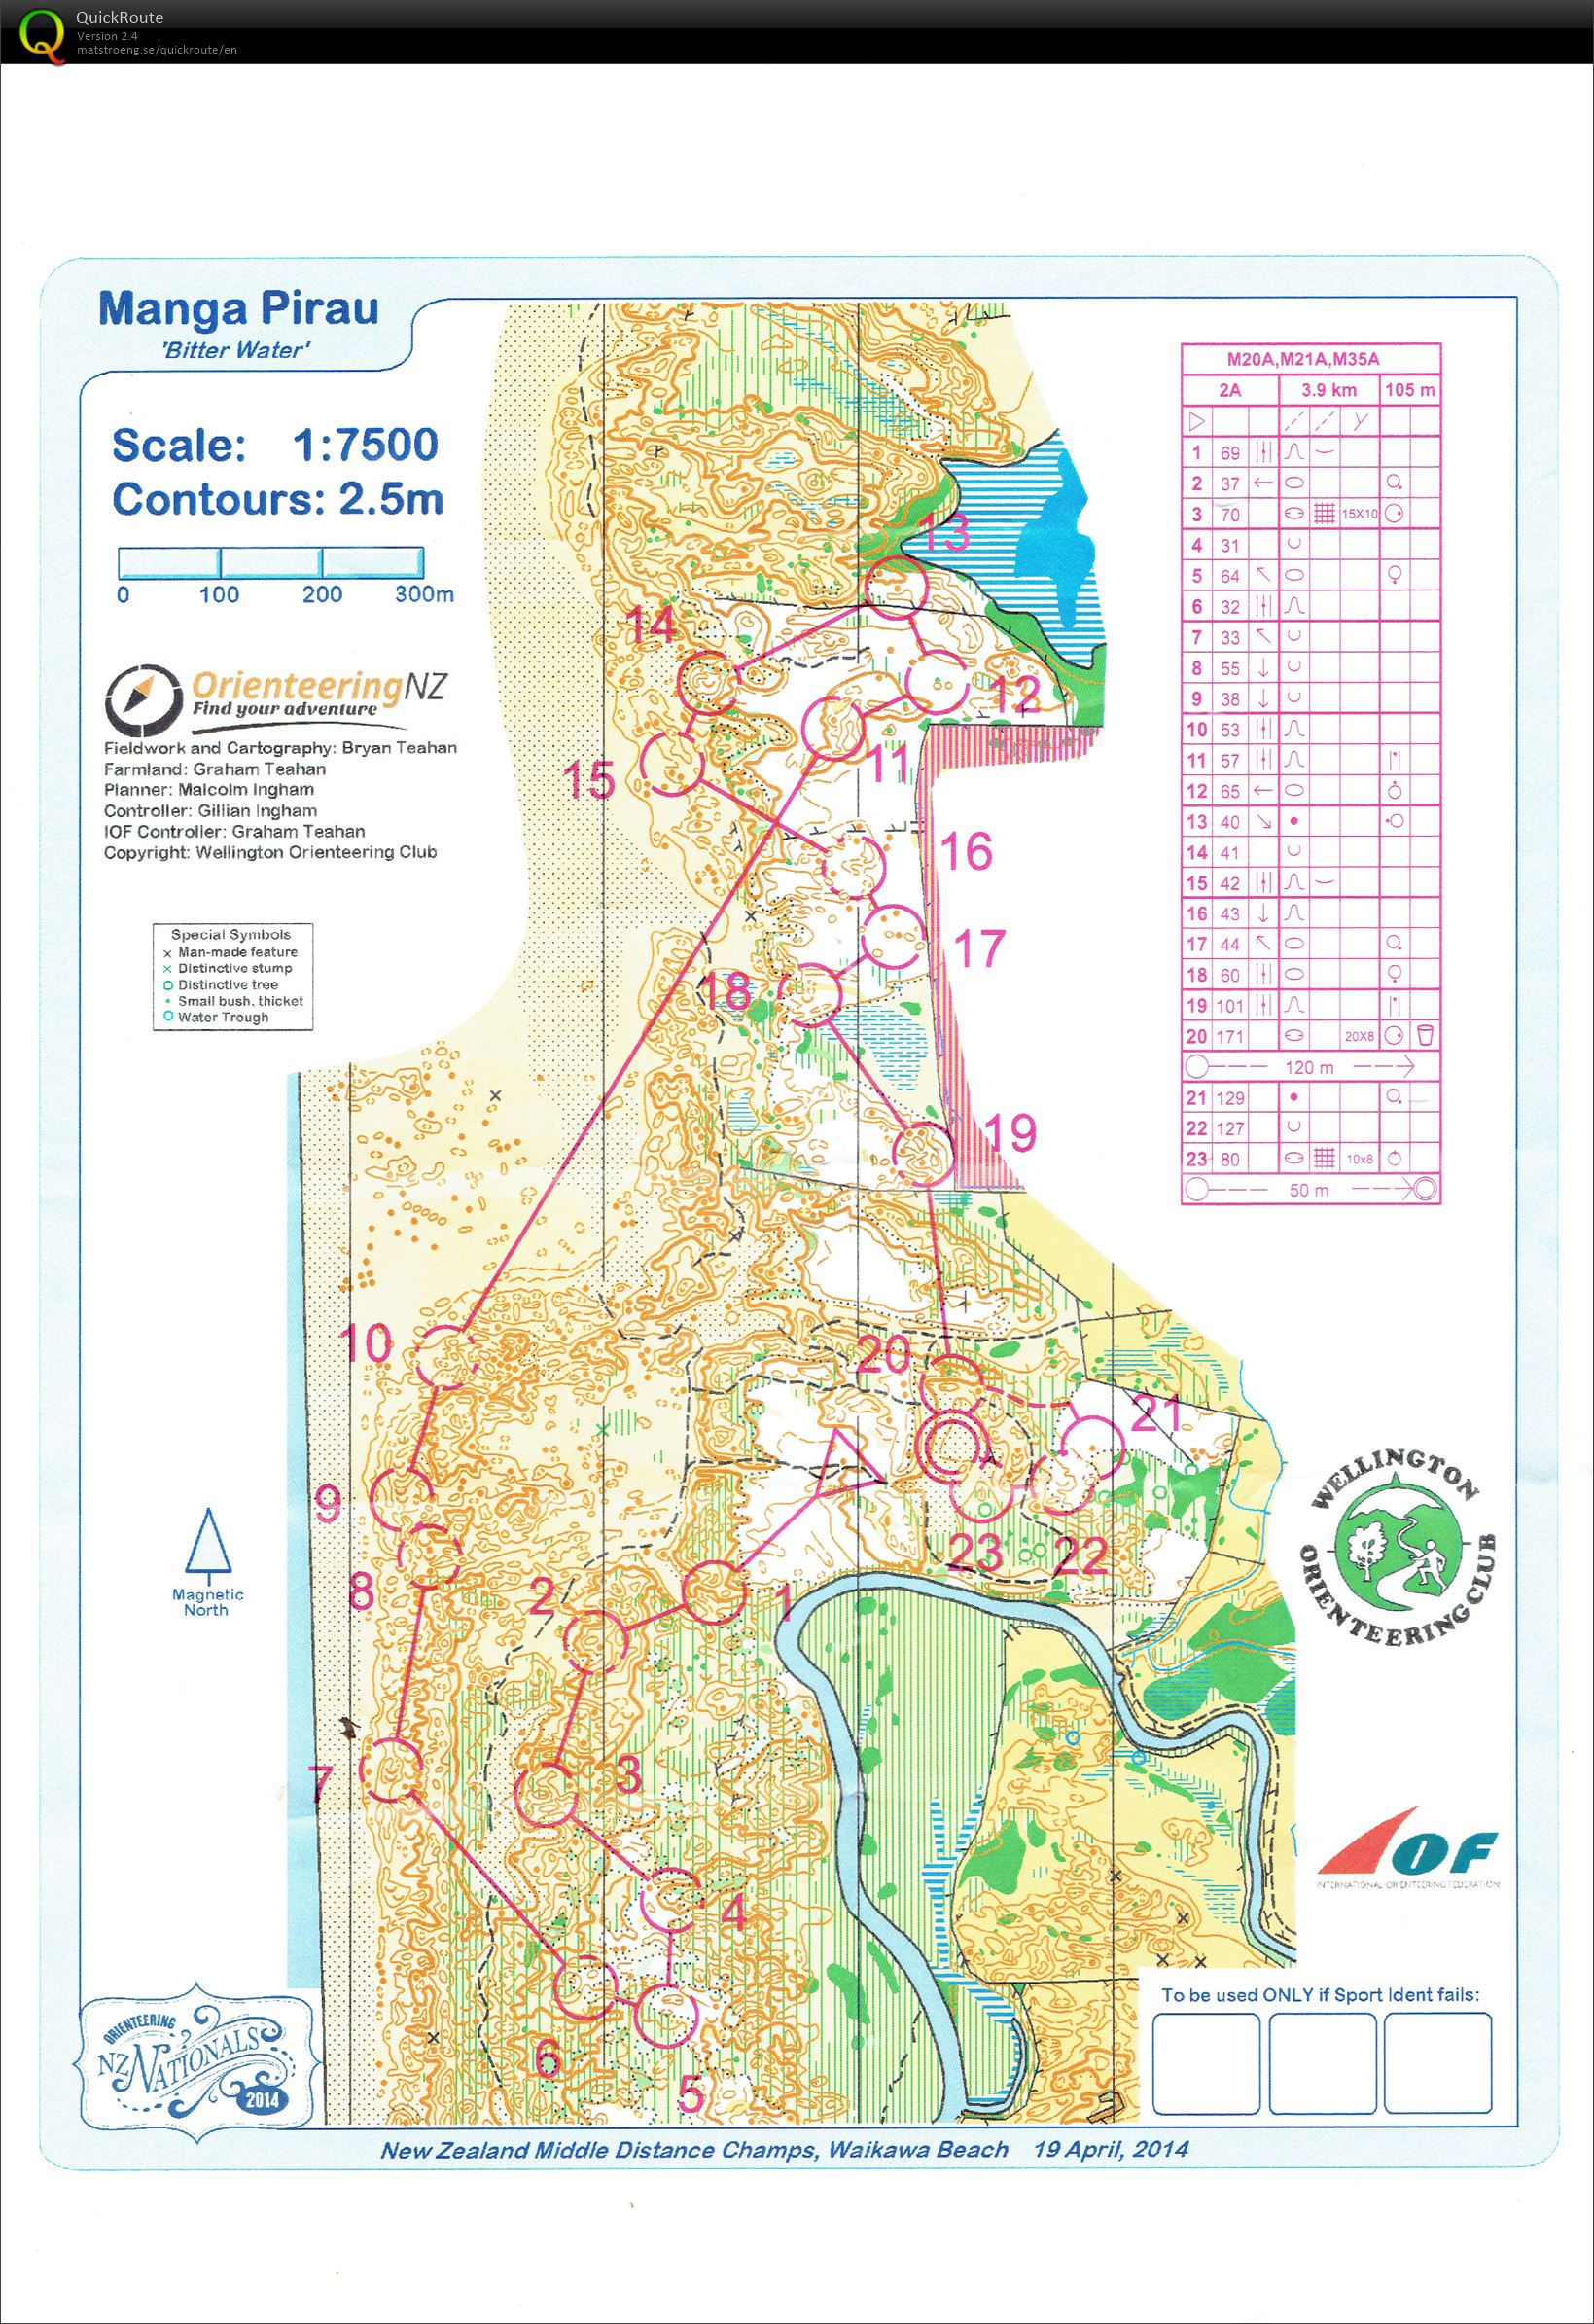 NZ Orienteering Champs - Middle Distance (19/04/2014)